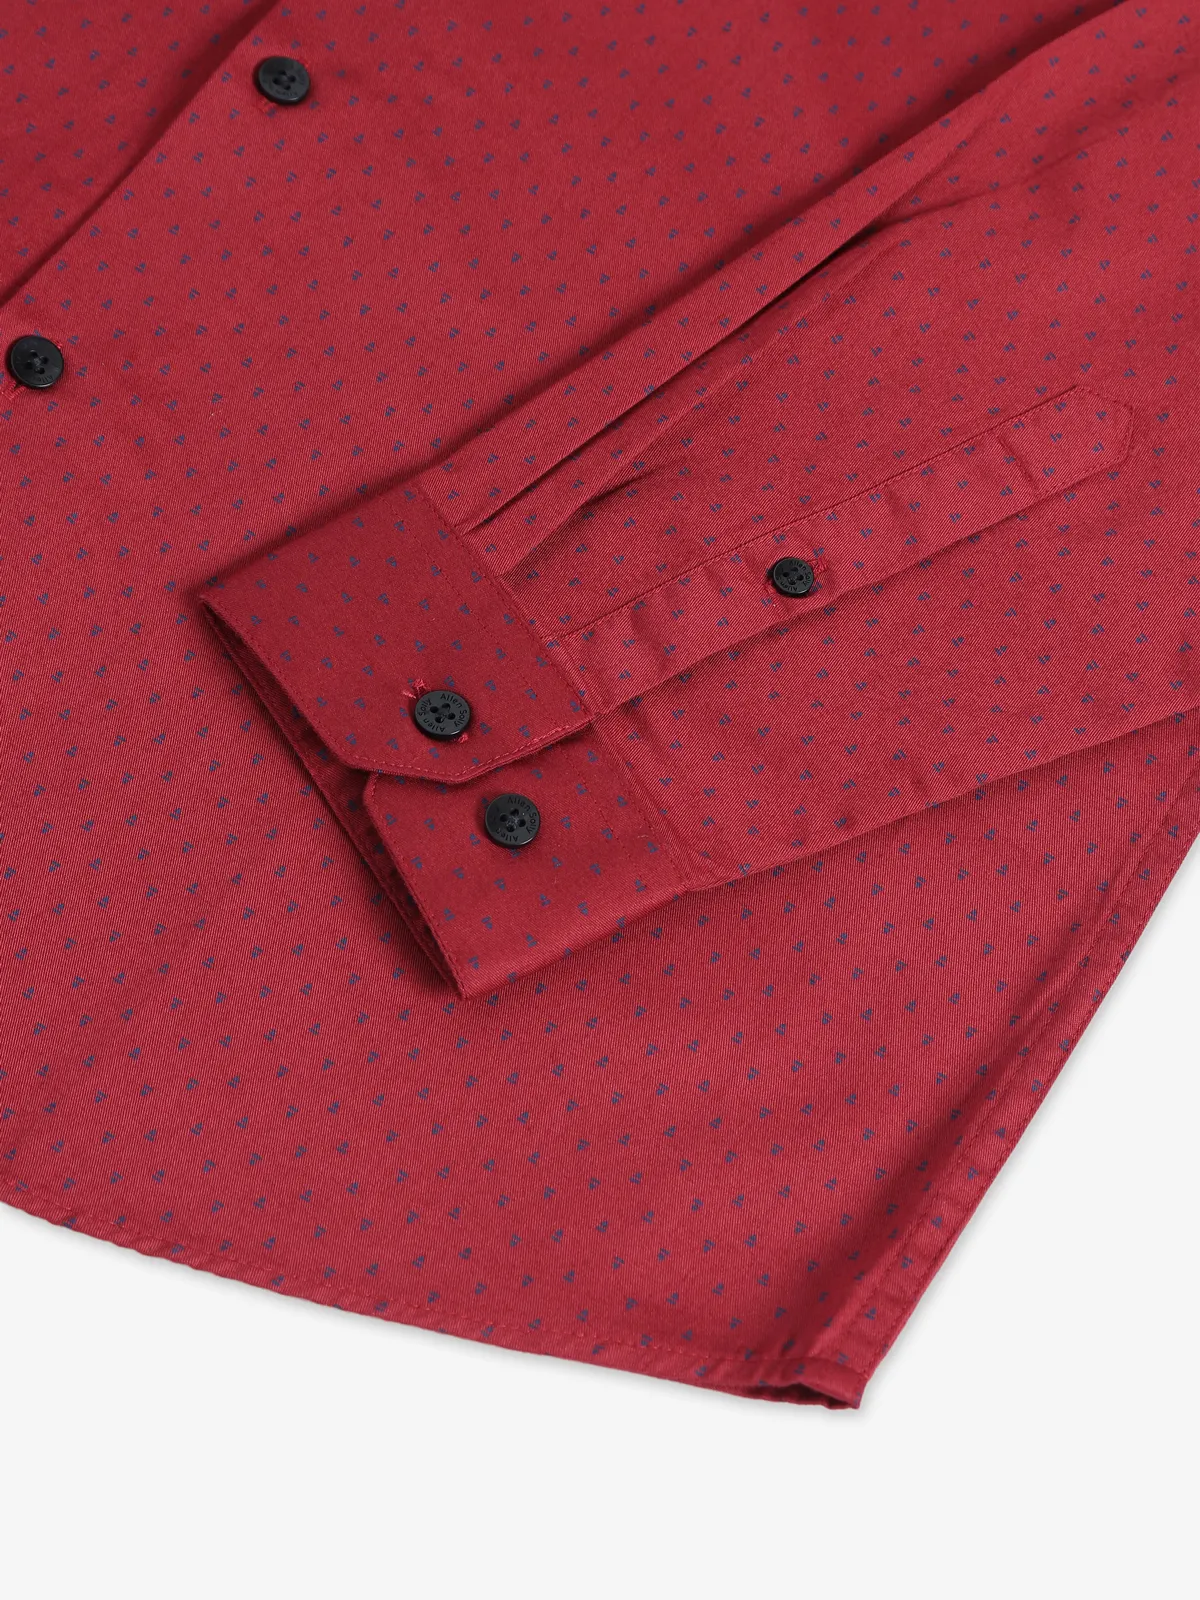 Allen Solly red printed shirt